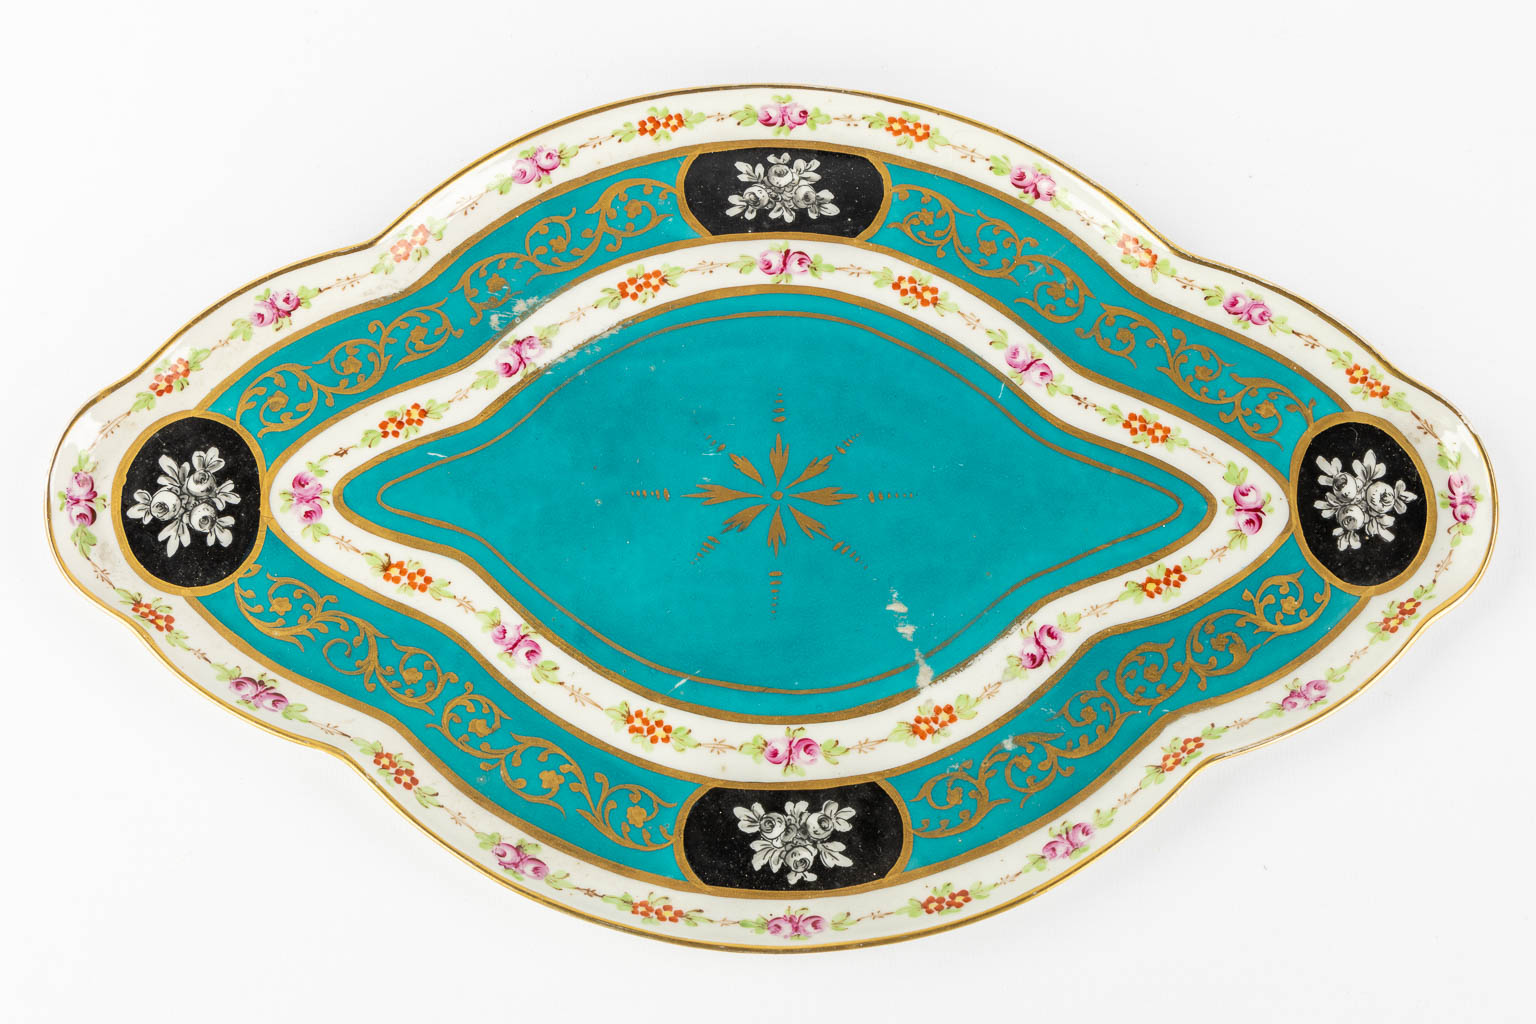 Pillivuyt, Paris, a tureen on a plate and an oval bowl. 20th C. (L:23 x W:36 x H:20 cm) - Image 15 of 21